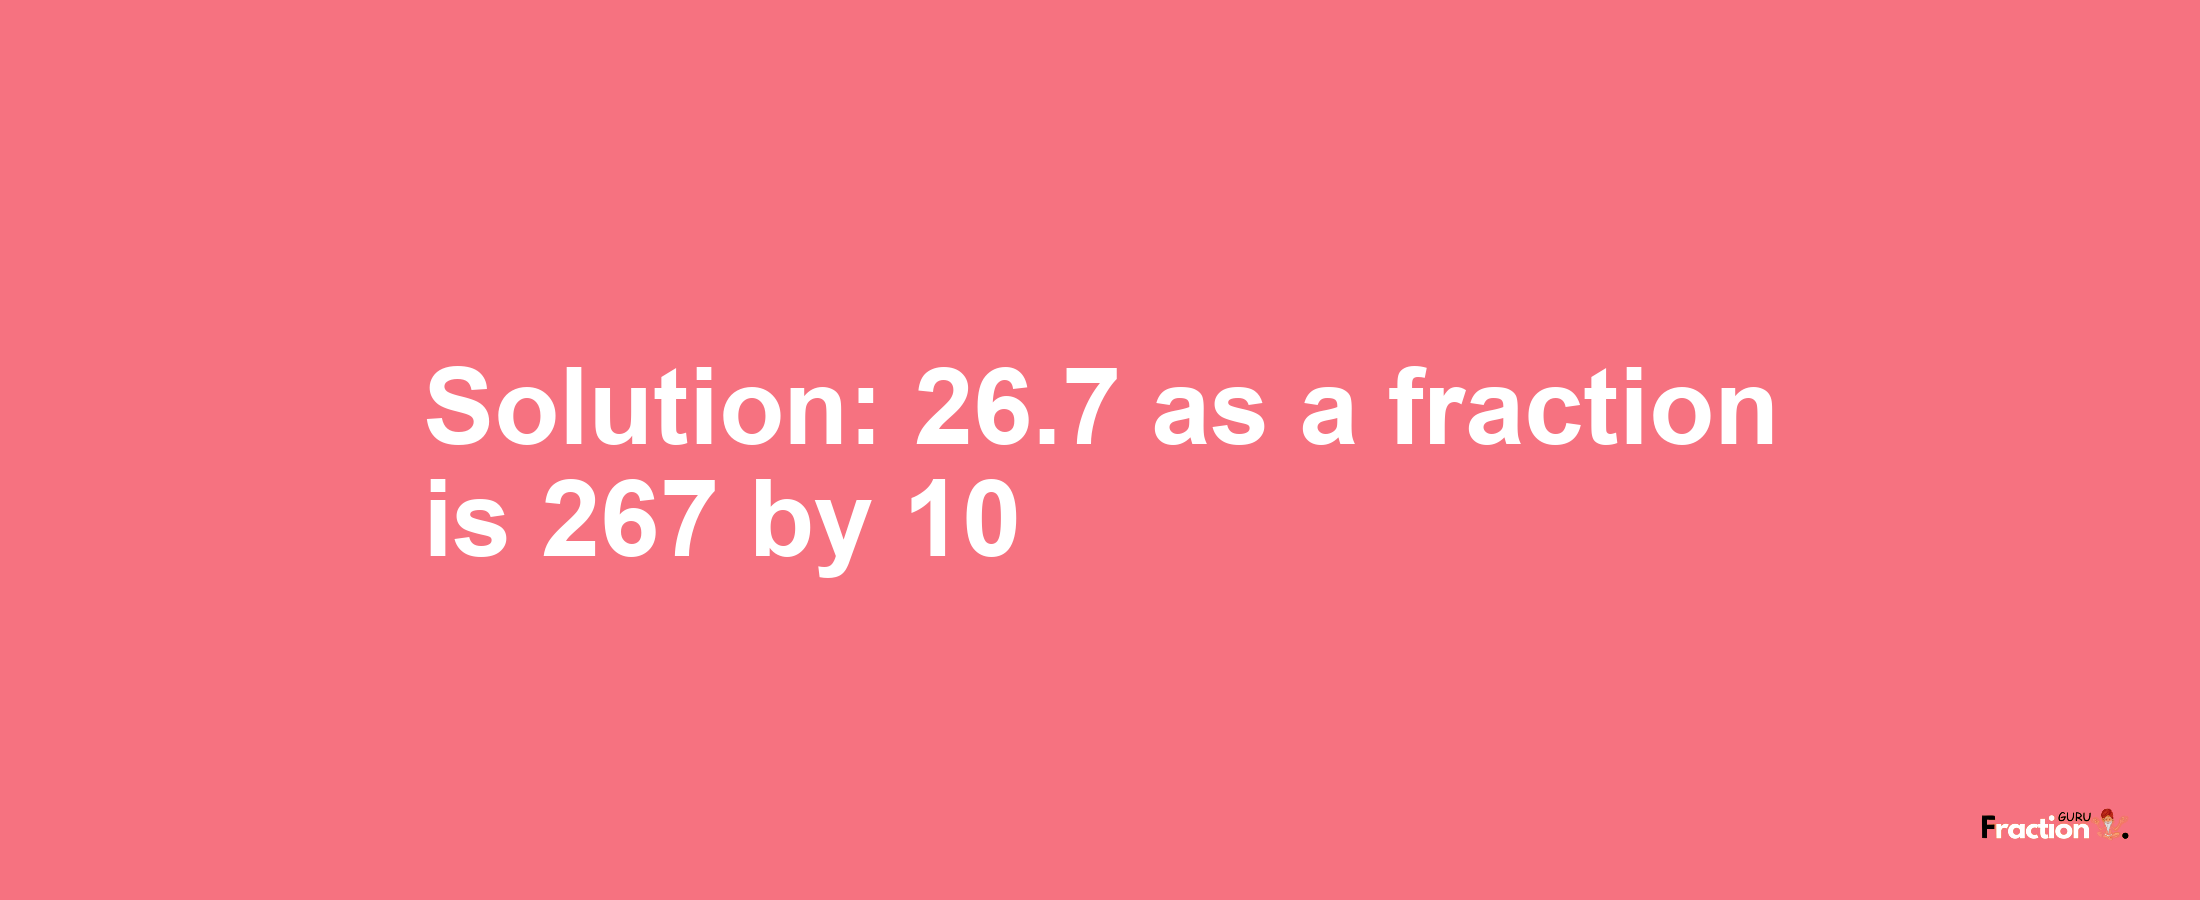 Solution:26.7 as a fraction is 267/10